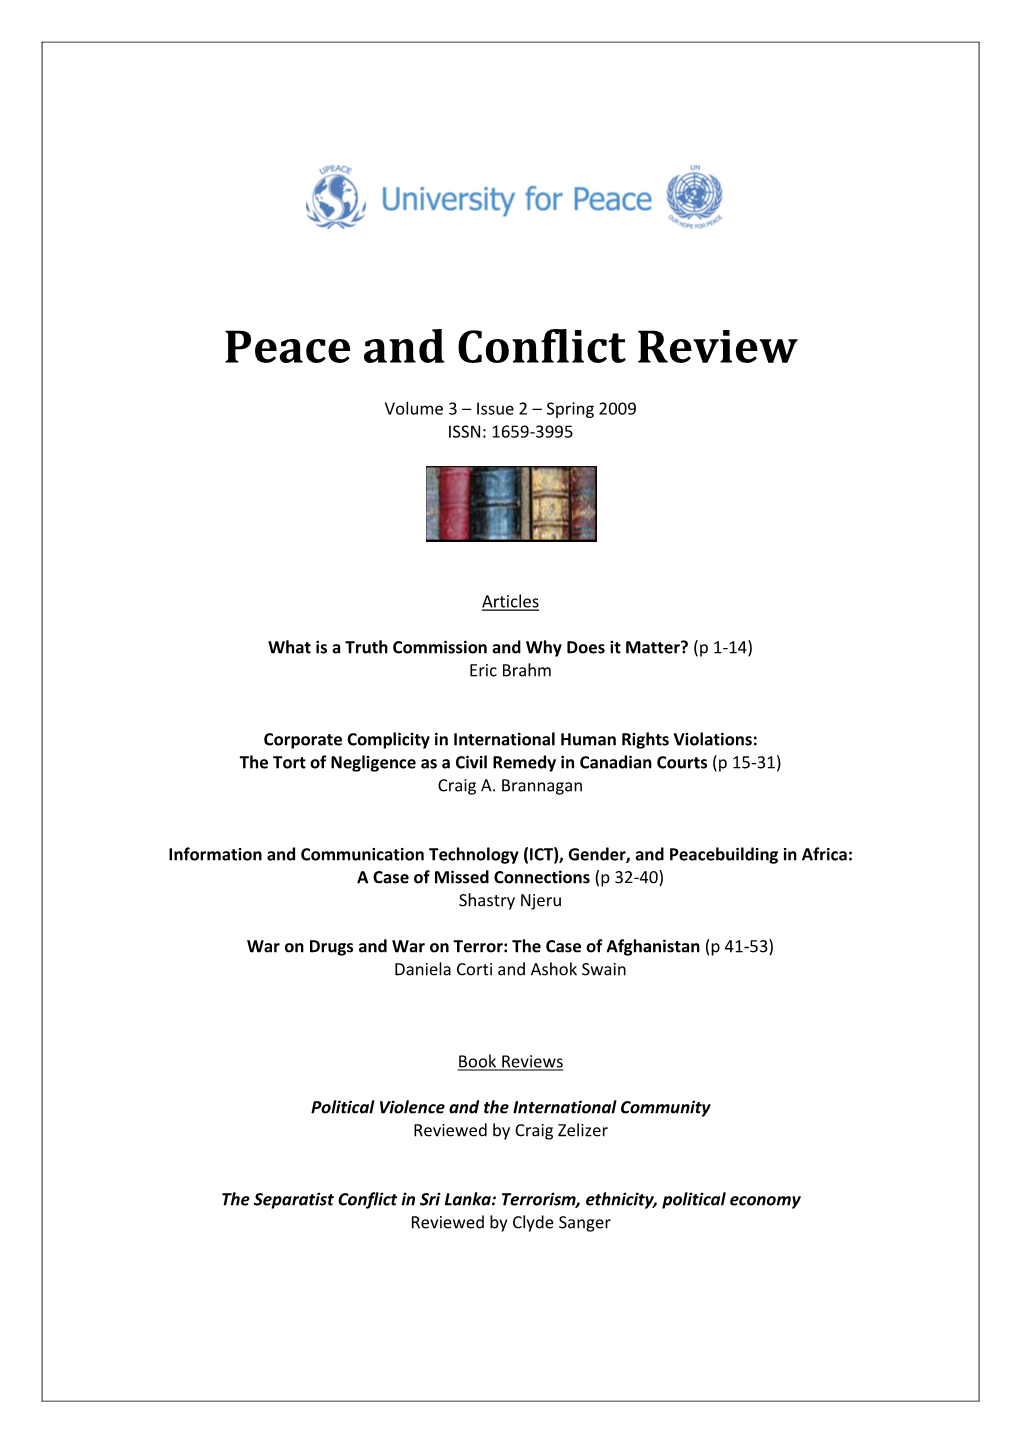 Peace and Conflict Review – Volume 3 Issue 2 (Spring 2009), 1-14